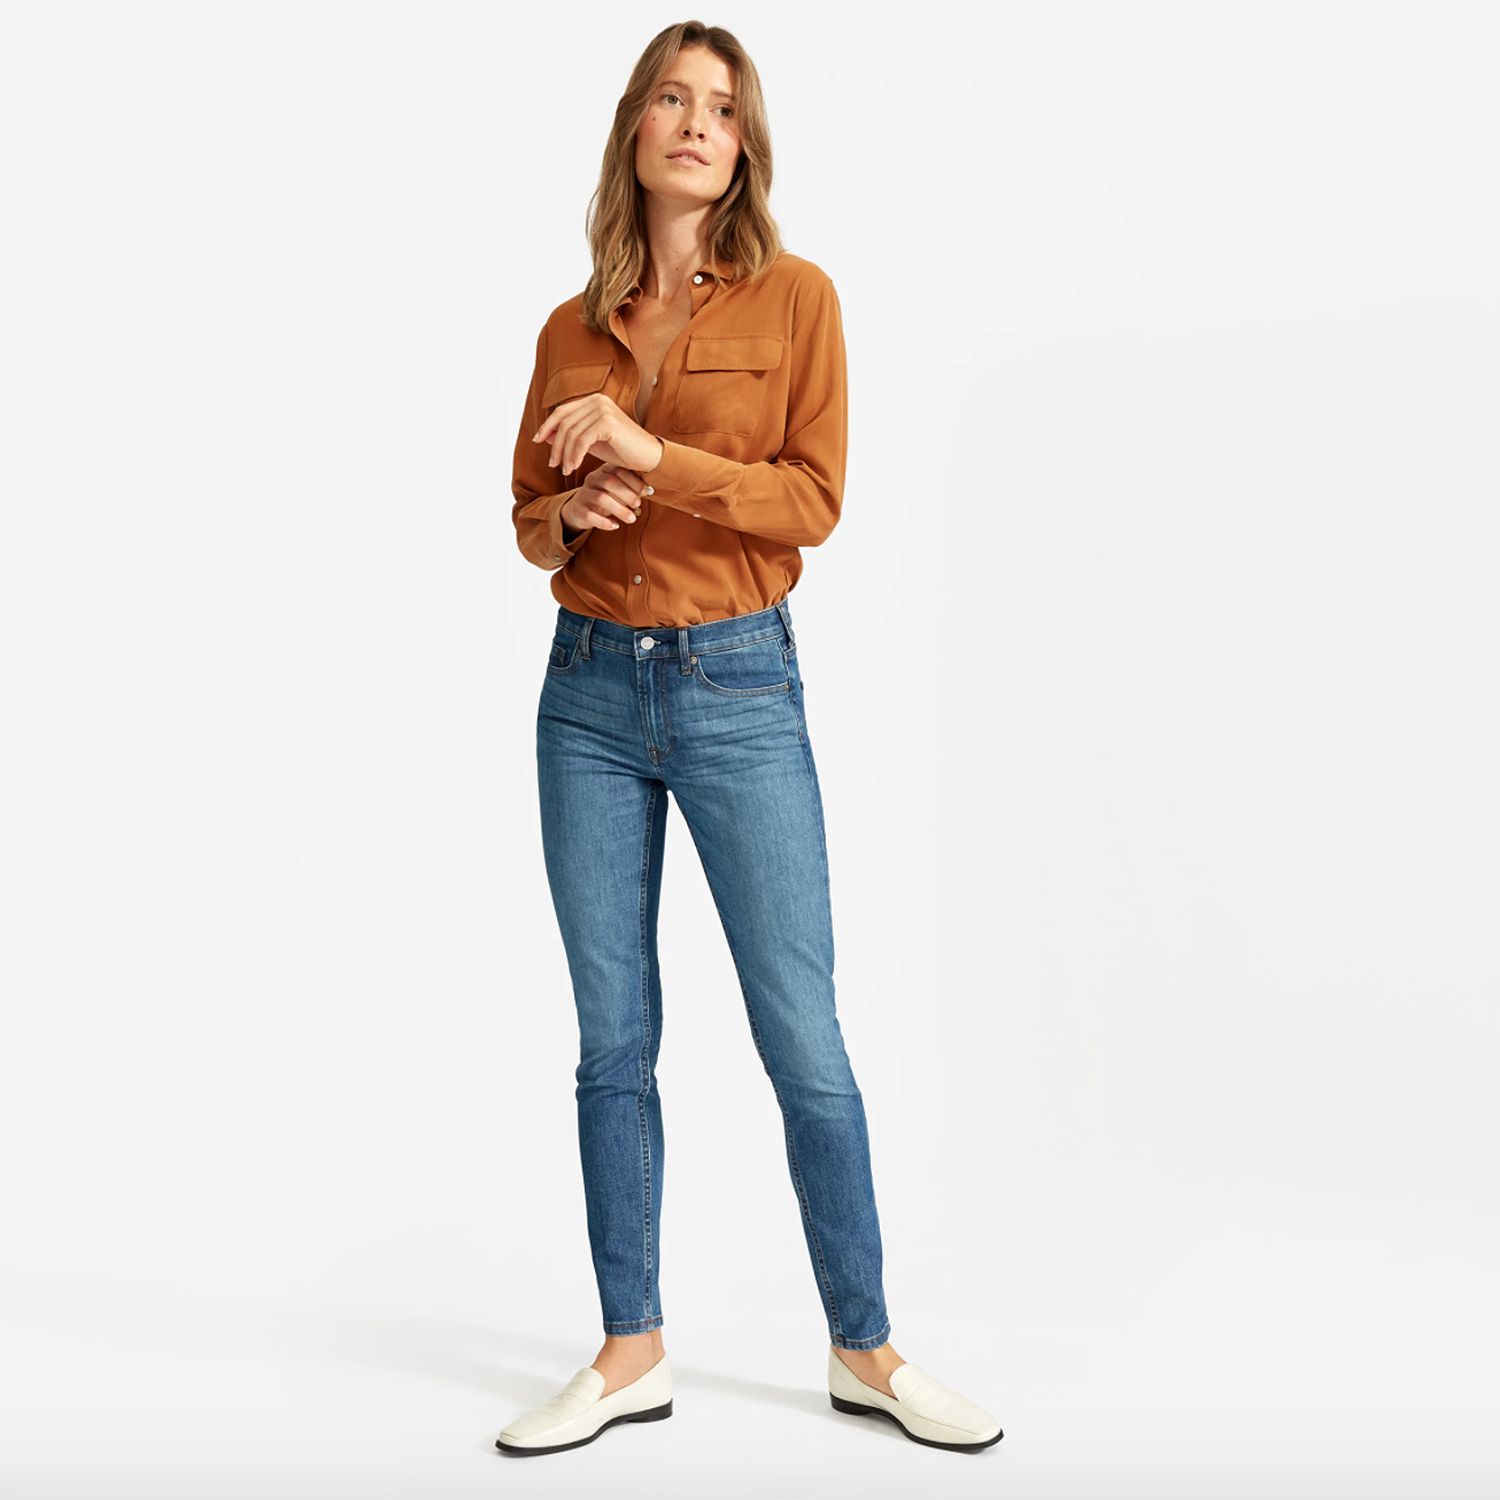 Everlane's Best-Selling Denim Is Up to 45% Off Right Now | PEOPLE.com